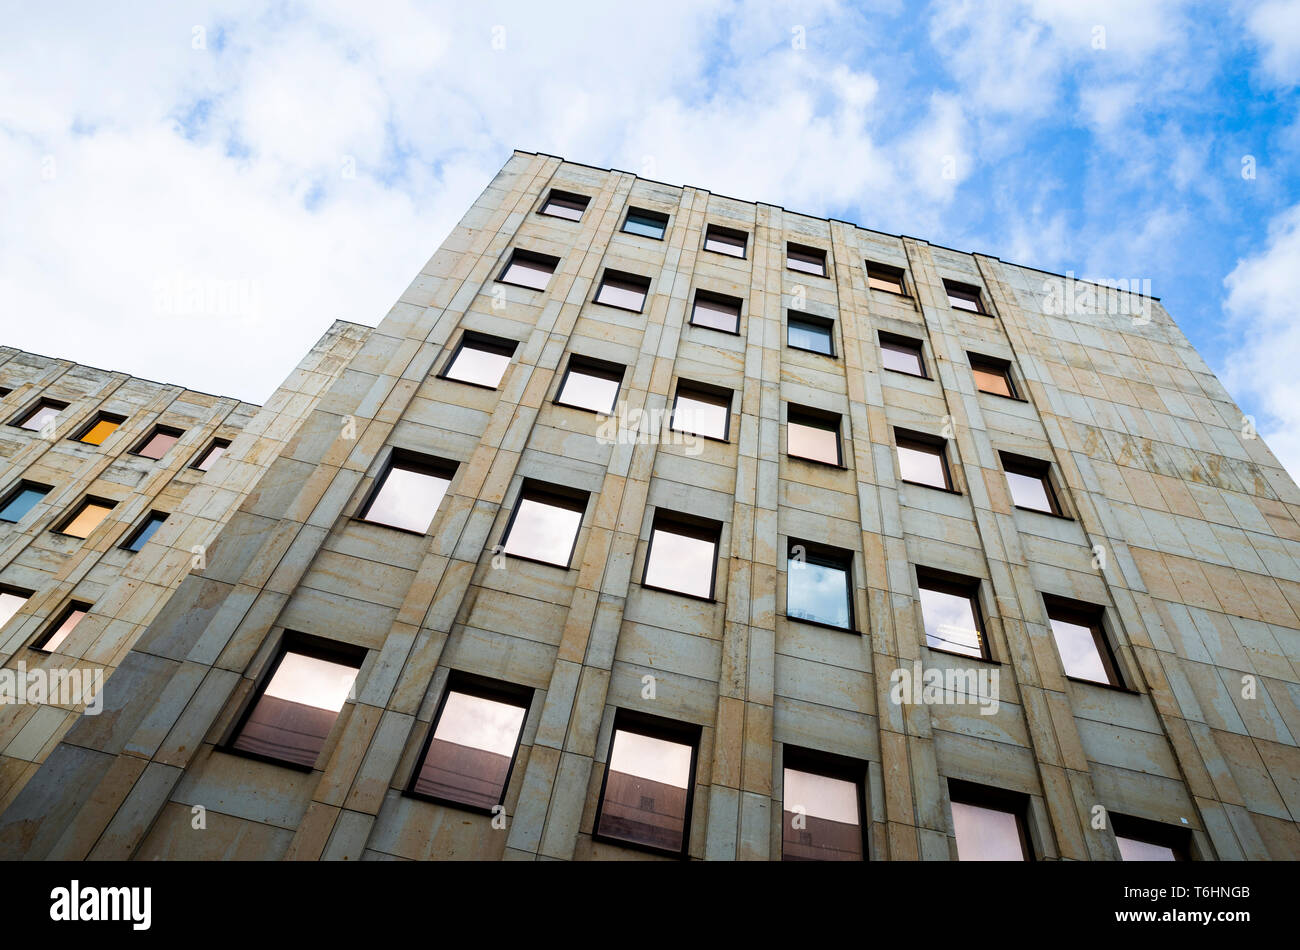 Tinted windows on an office block in Berlin, Germany. Stock Photo